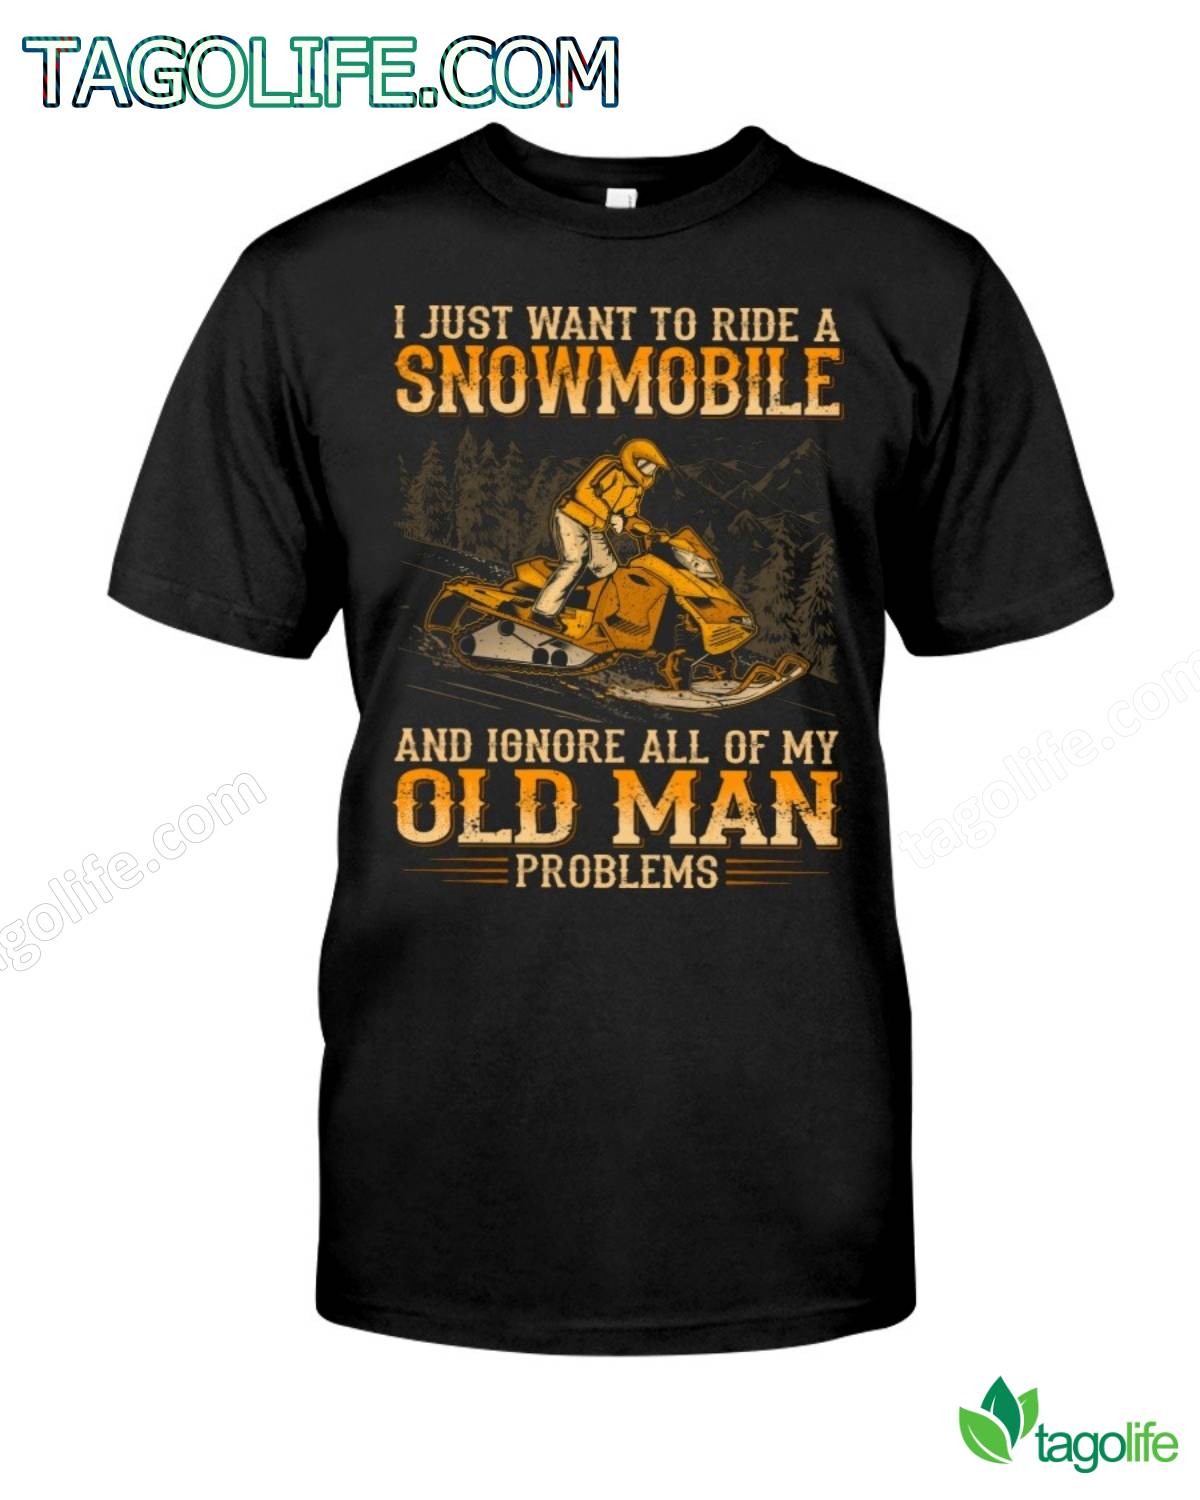 I Just Want To Rice A Snowmobile And Ignore All Of My Old Man Problems T-Shirt